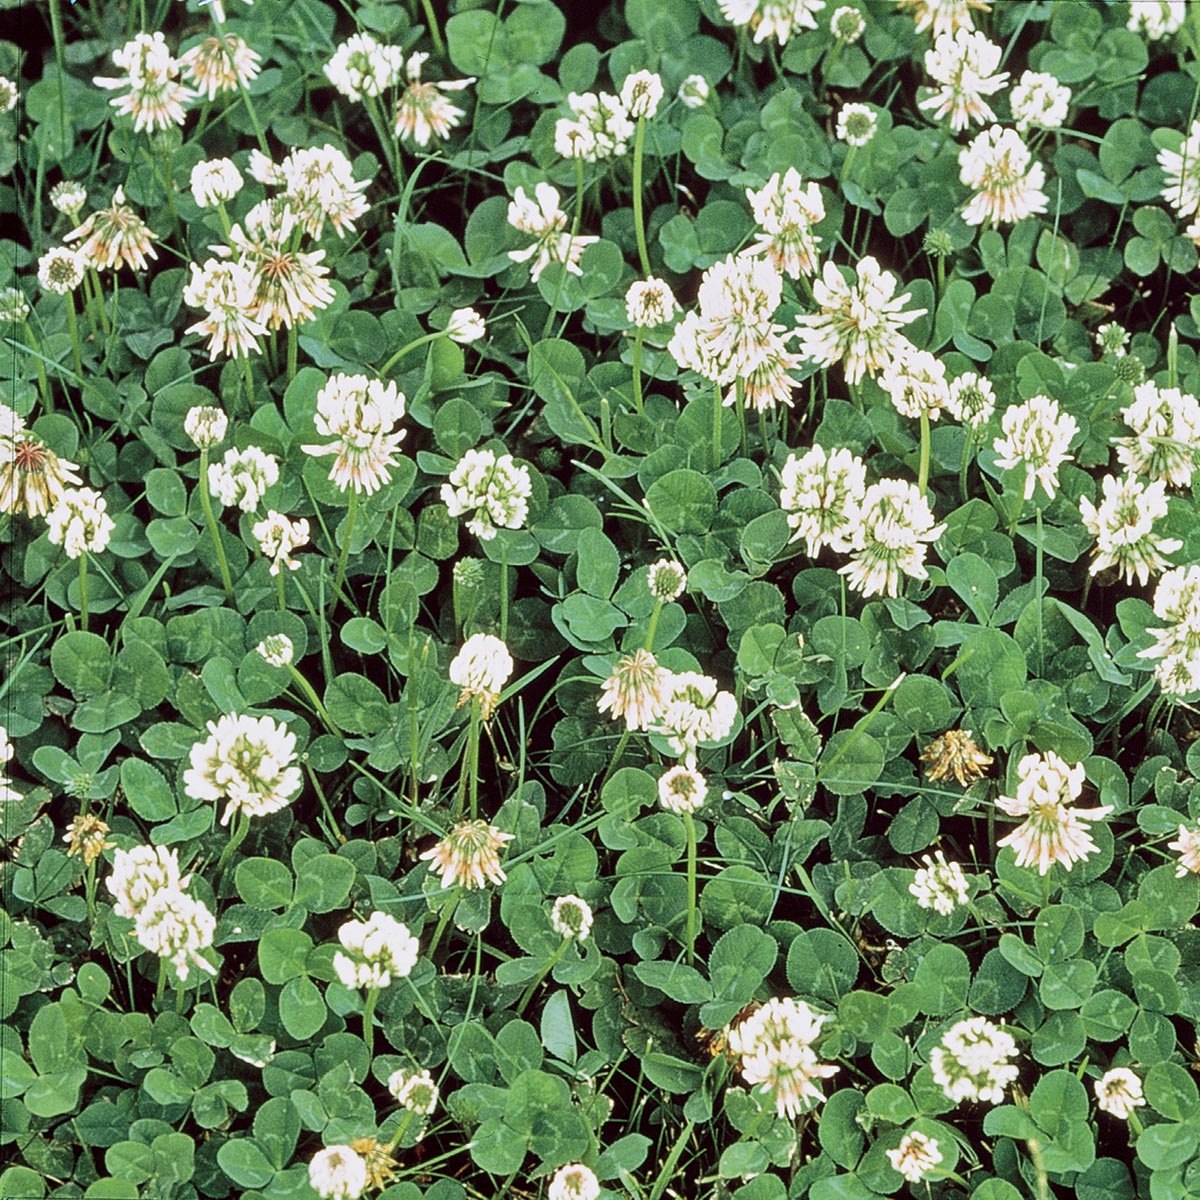 Gardens Alive! White Dutch Clover Erosion Control Seeds - 1 lb. bag covers 4,000 sq ft - image 1 of 2